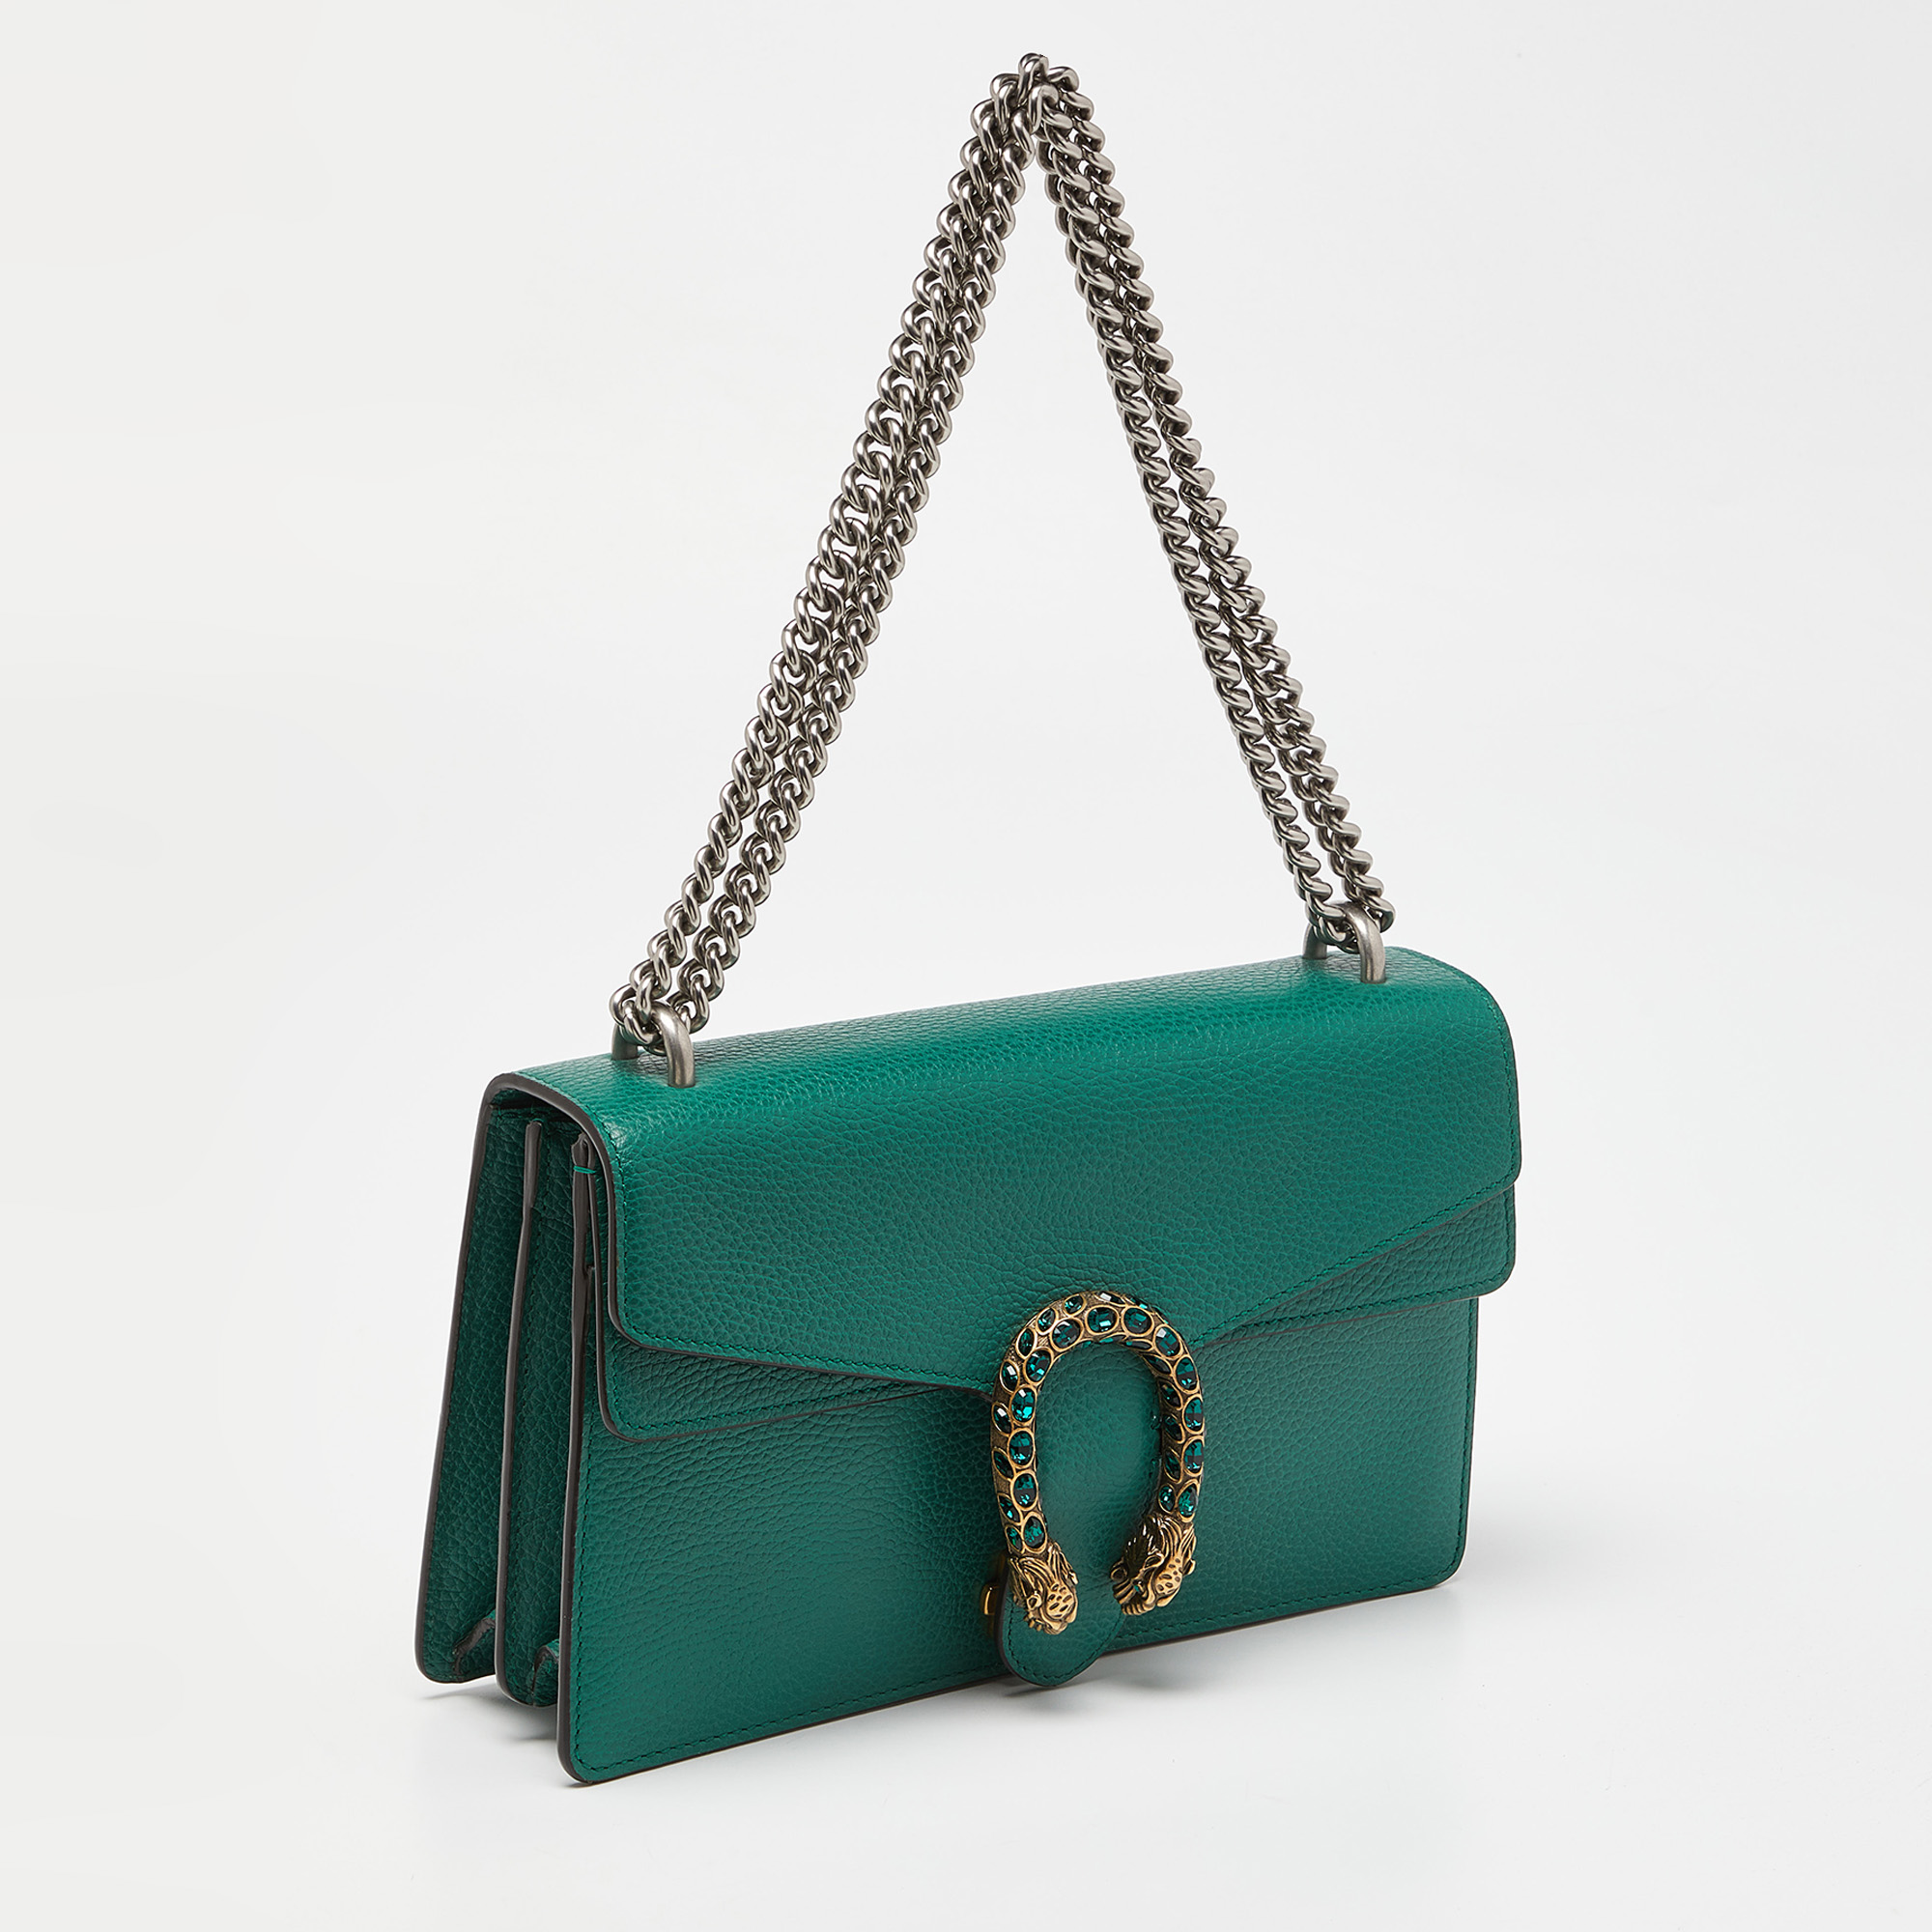 Gucci Green Leather Small Dionysus Crystals Shoulder Bag